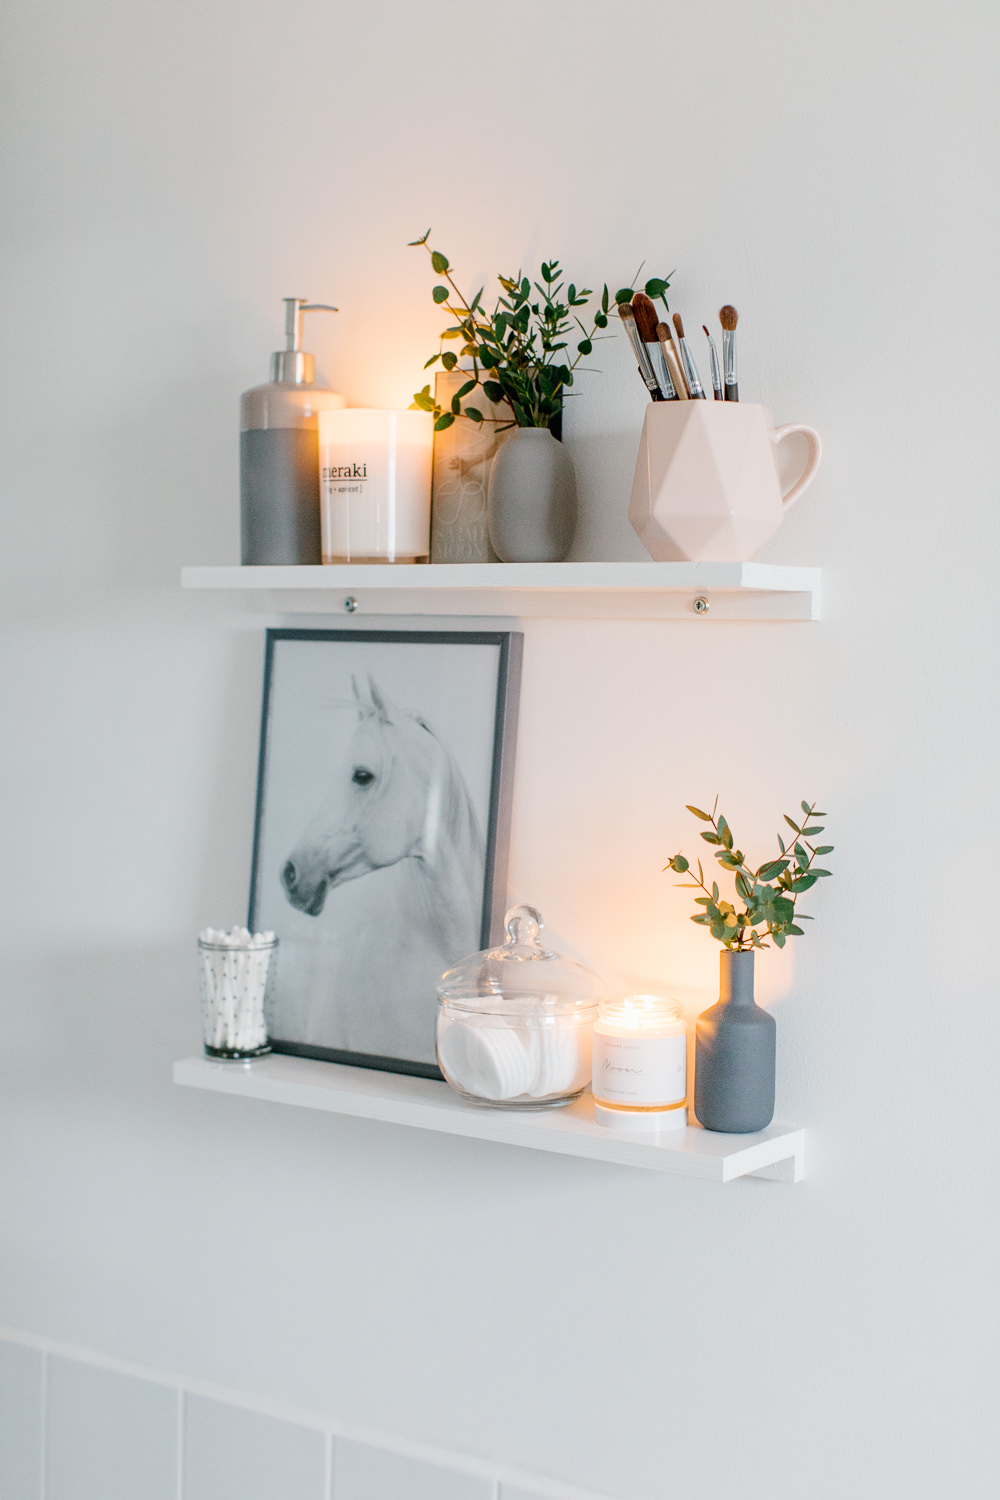 Bathroom shelving with candles